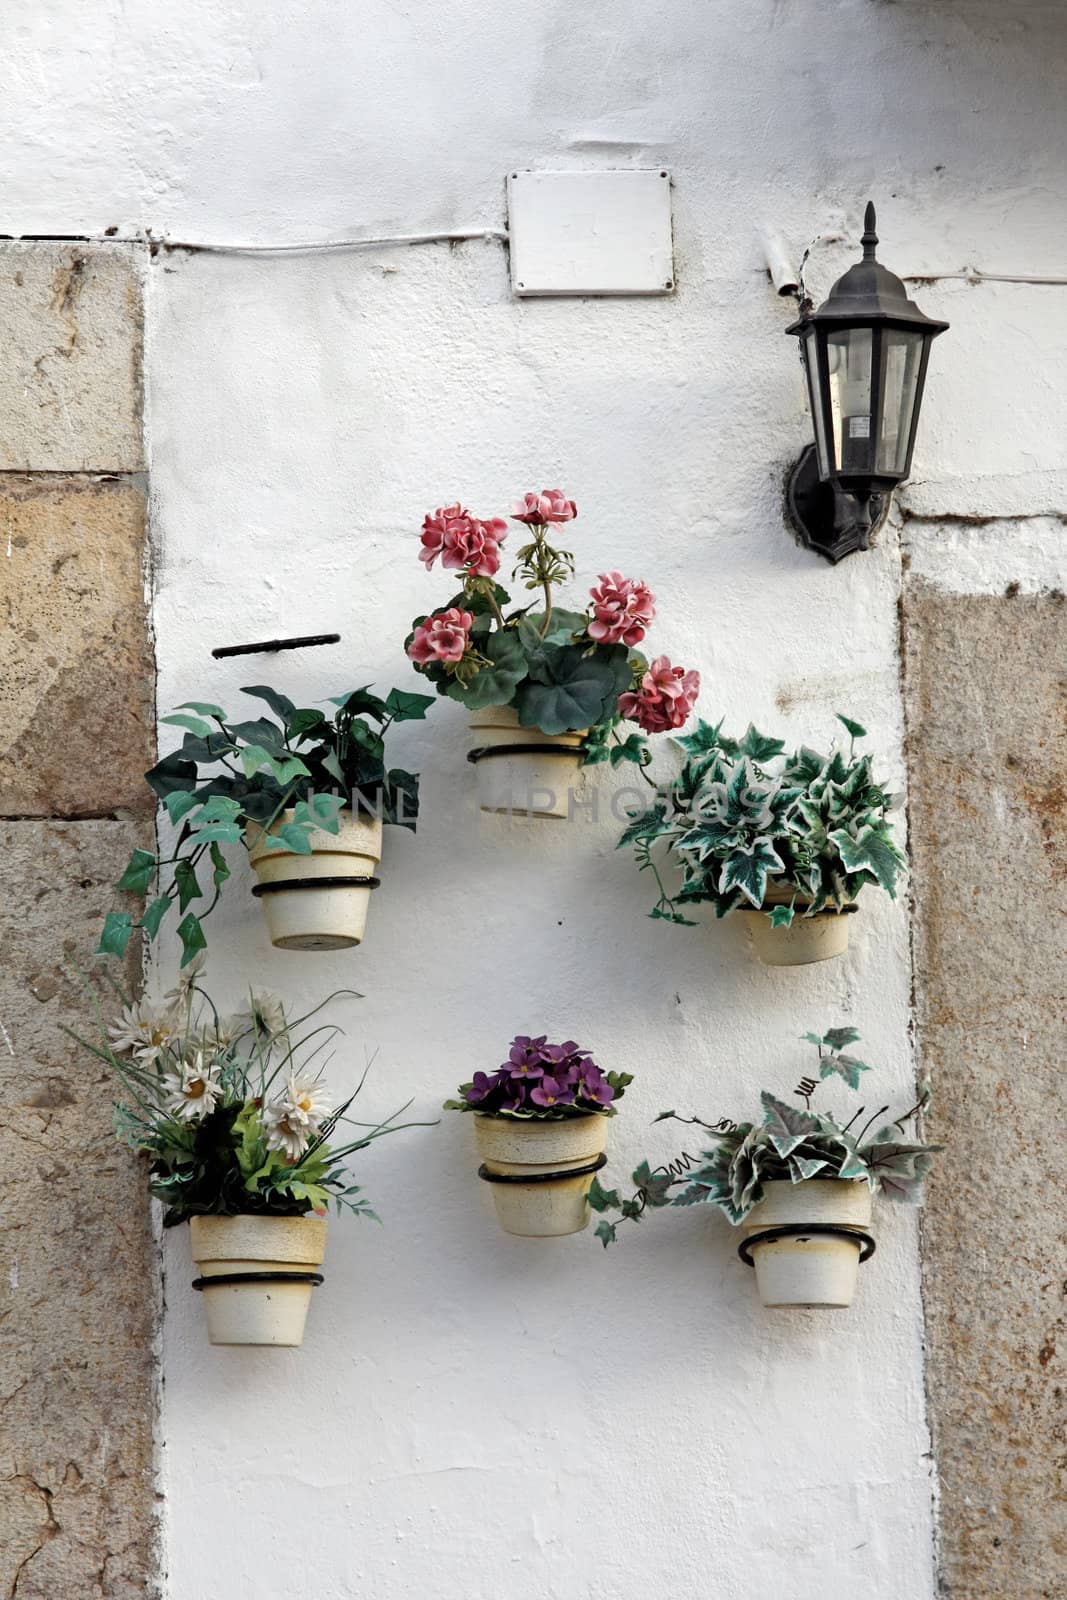 Several flower pots aligned on a wall.